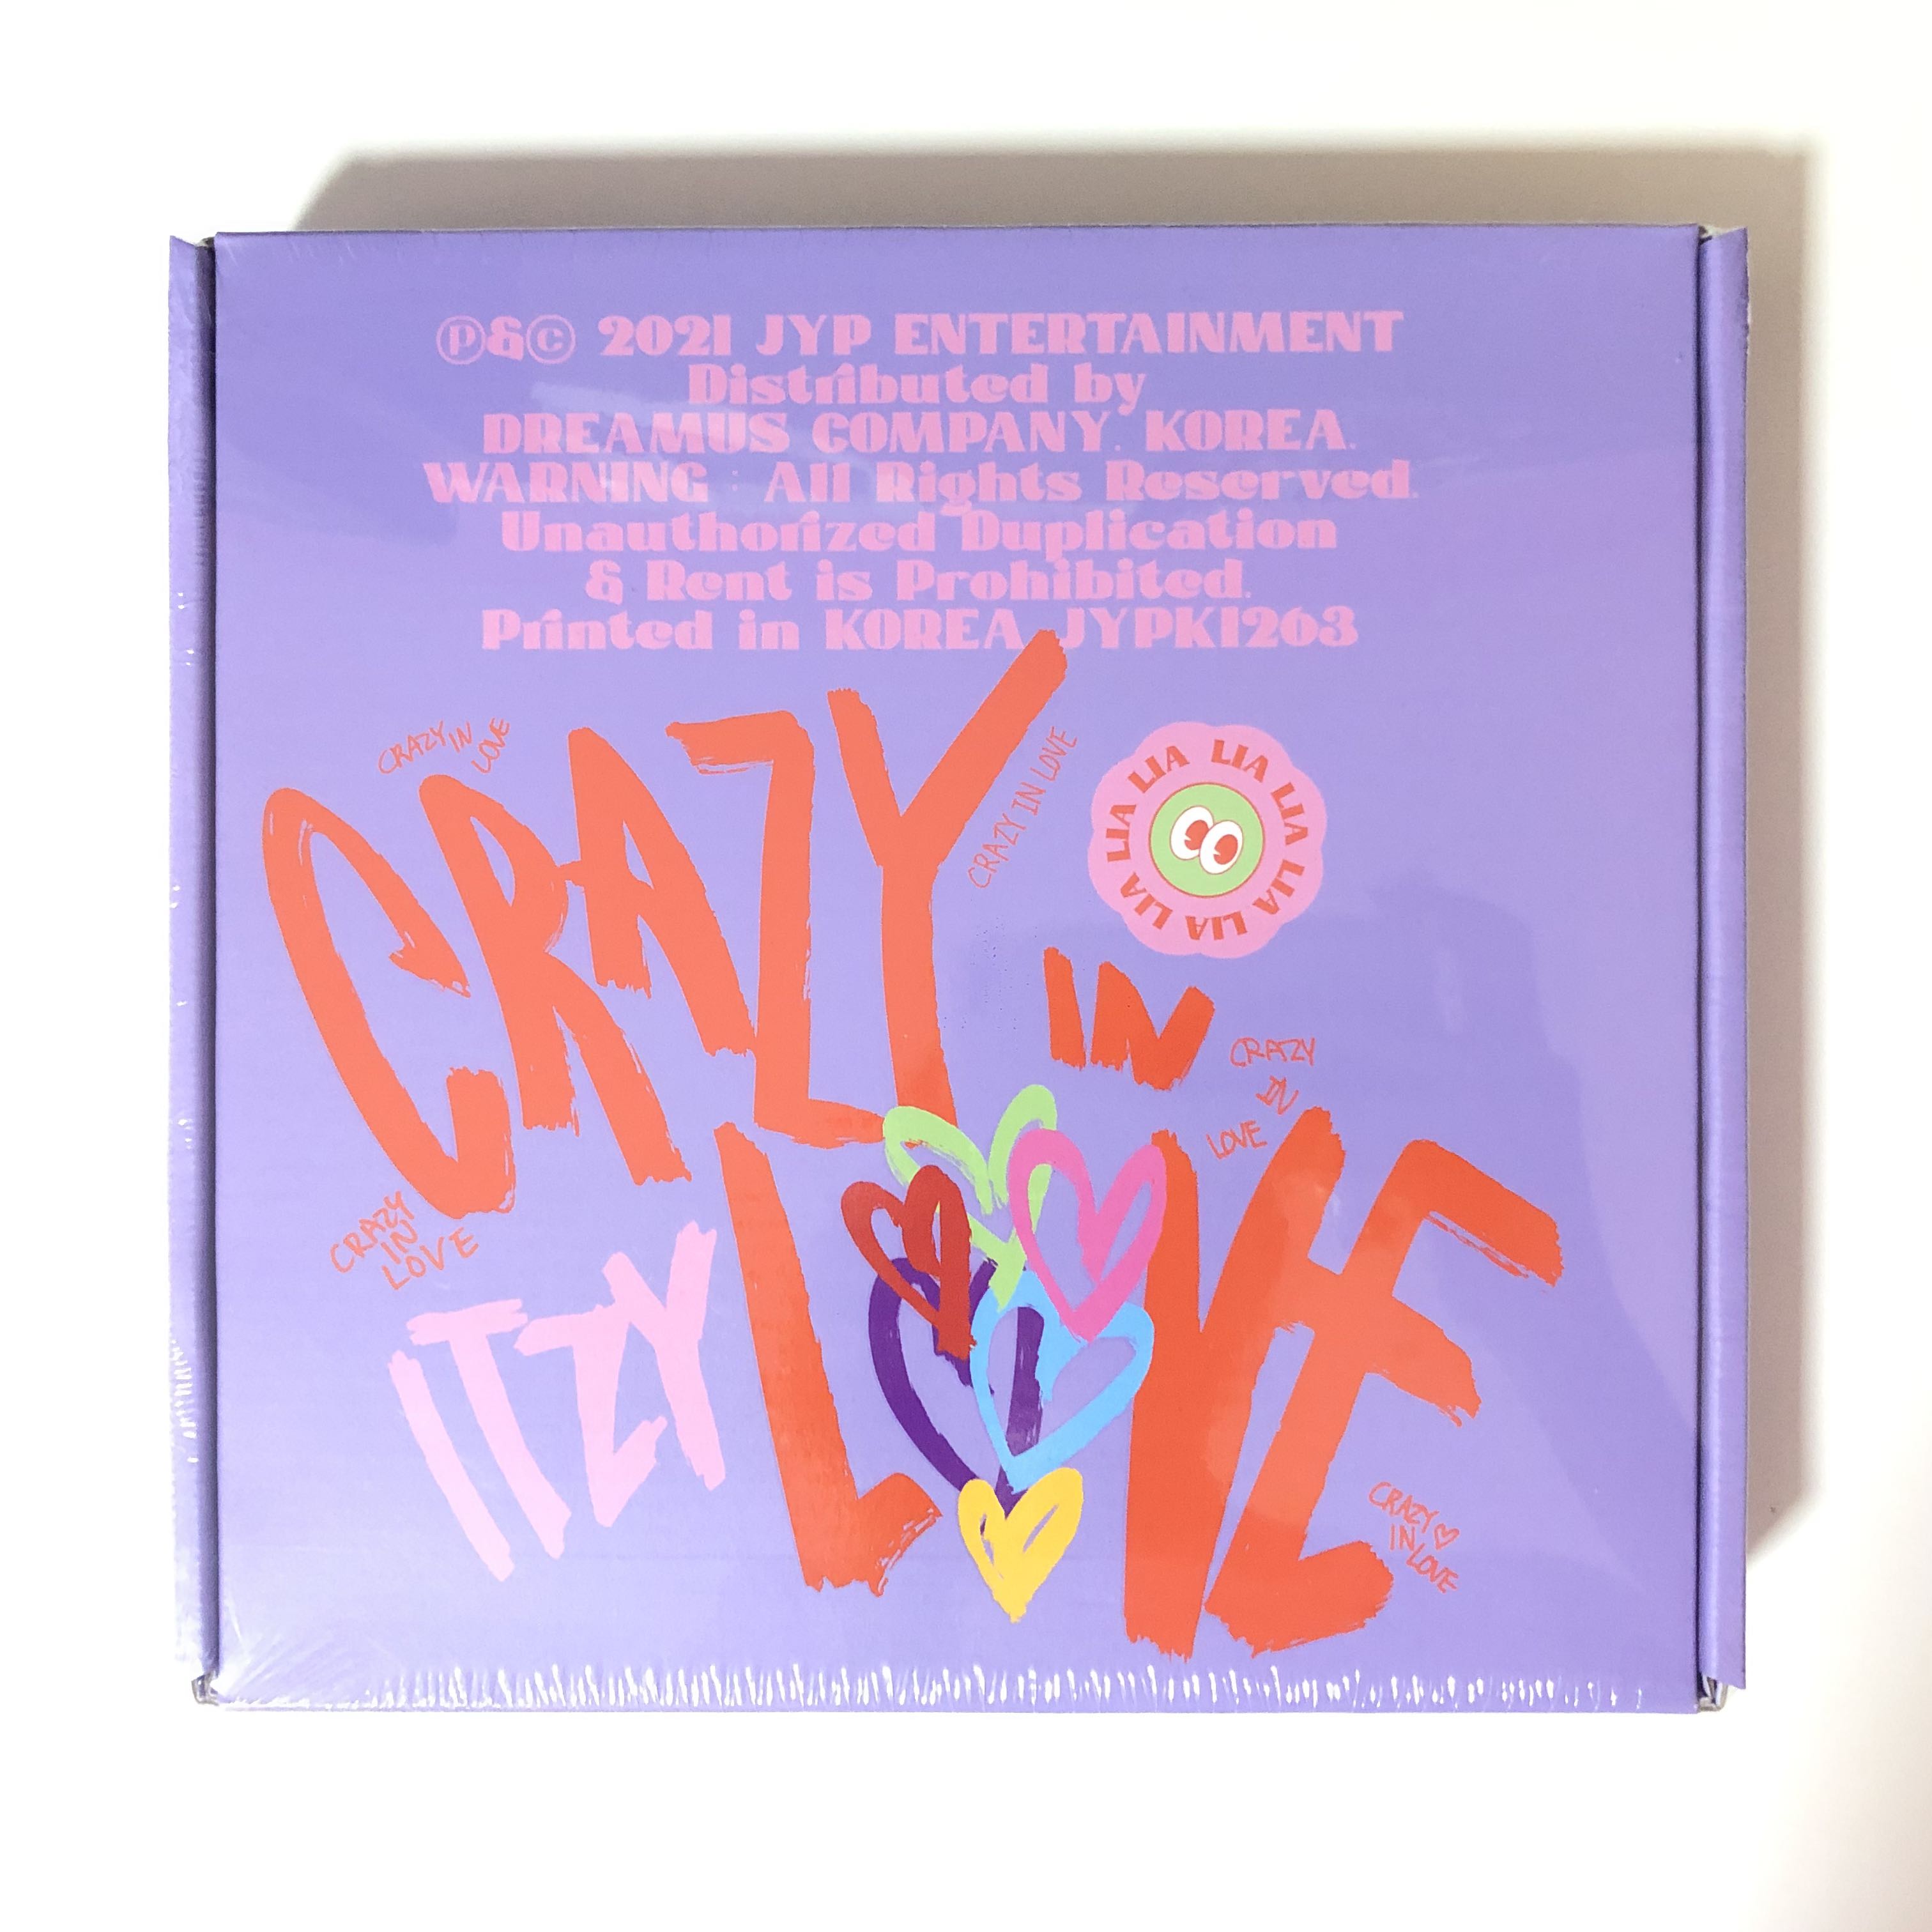 ITZY The 1st Album [CRAZY IN LOVE] Pre-order open at MyMusicTaste